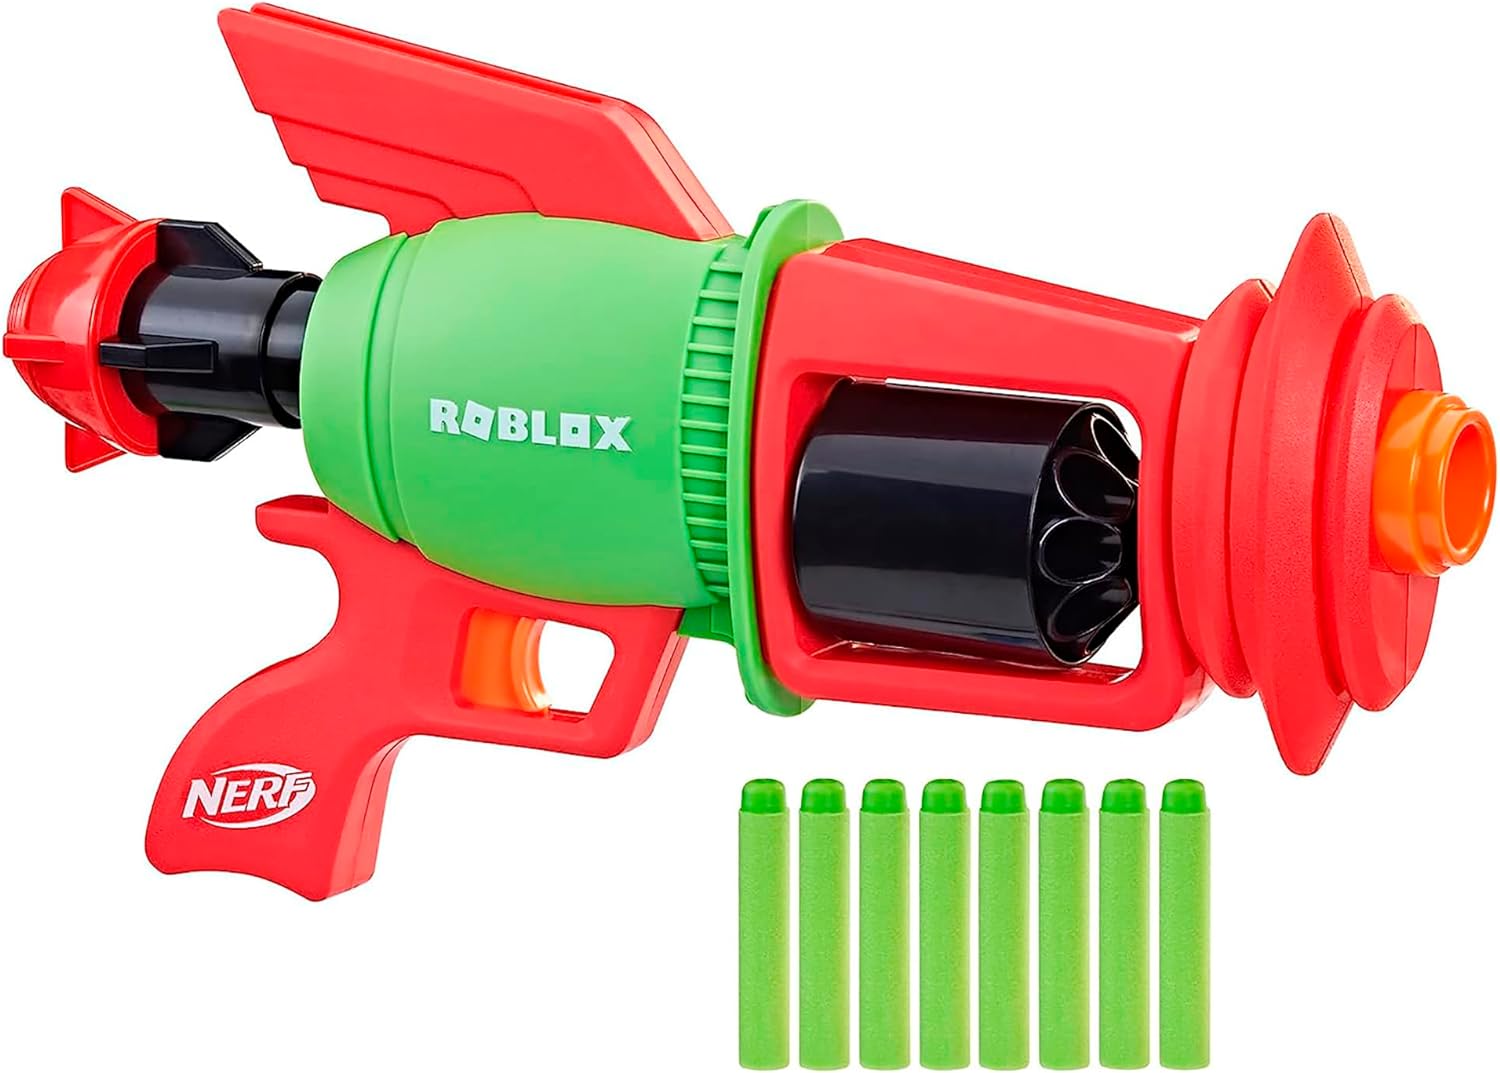 This was one was his favorite Christmas gifts, it was nice the gun took other darts he already had. It is thick and sturdy. Looks like its going to last. Also hes obsessed with roblox.